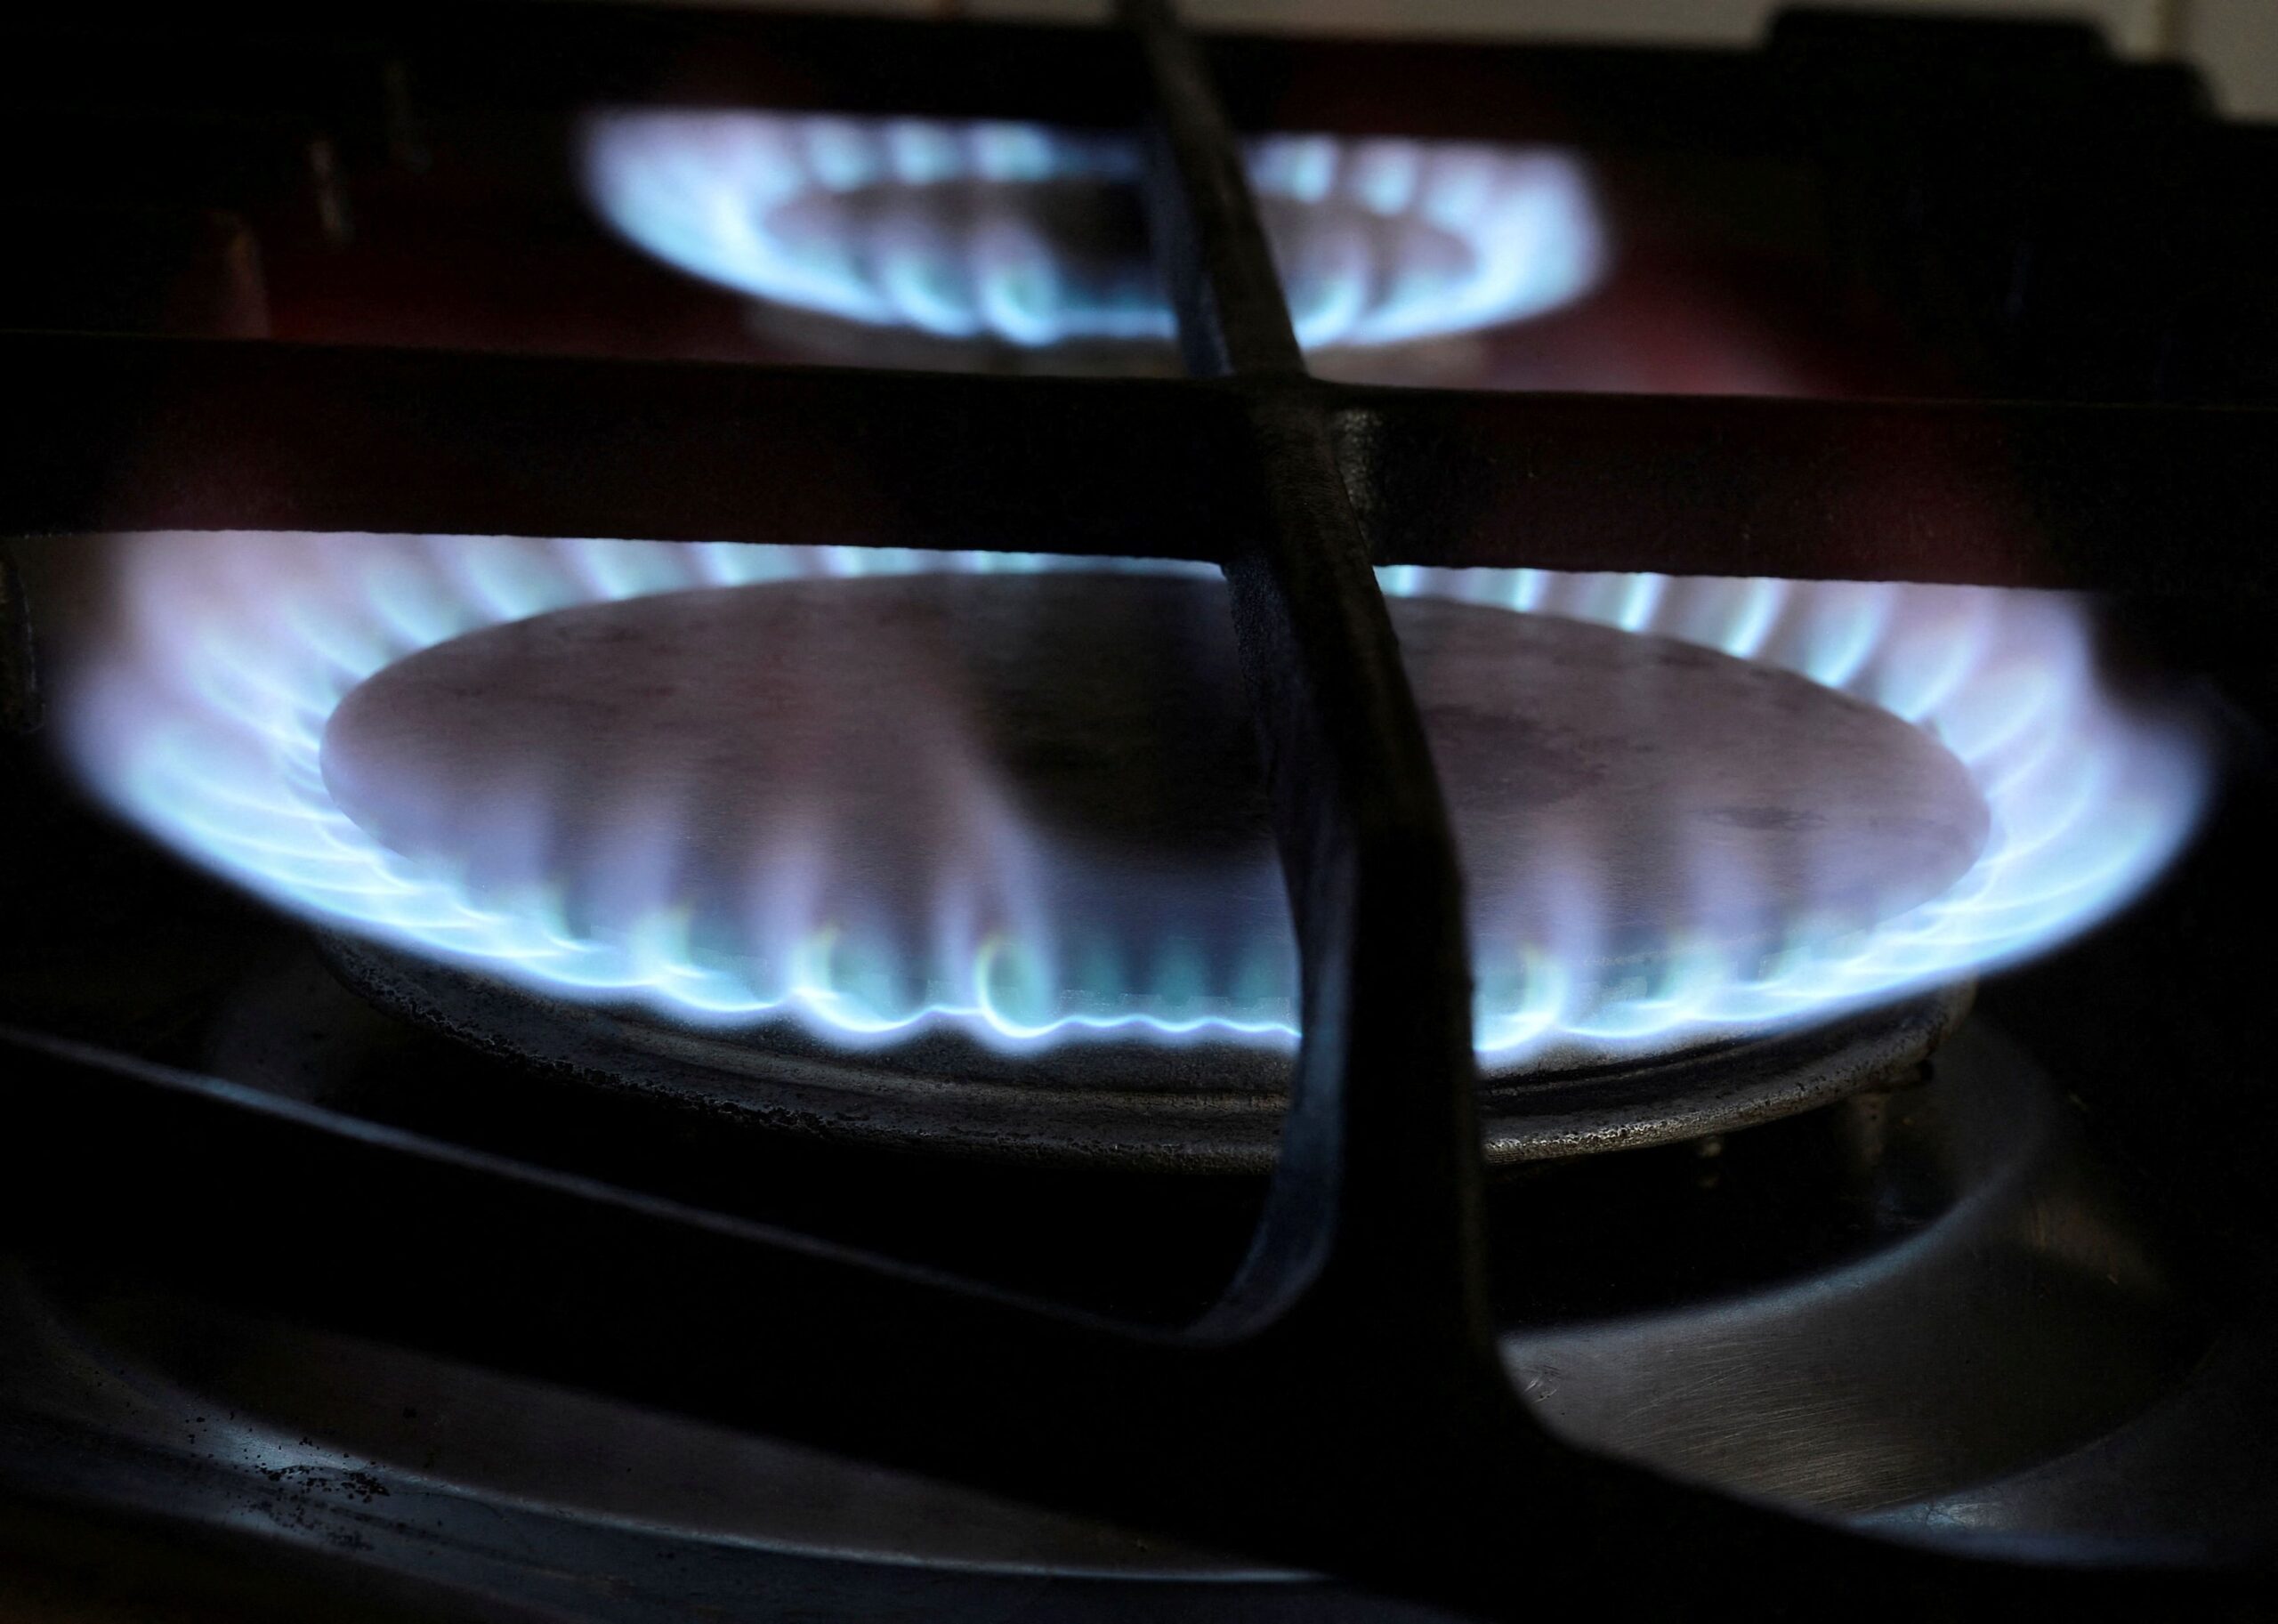 British households face fuel poverty as energy prices skyrocket